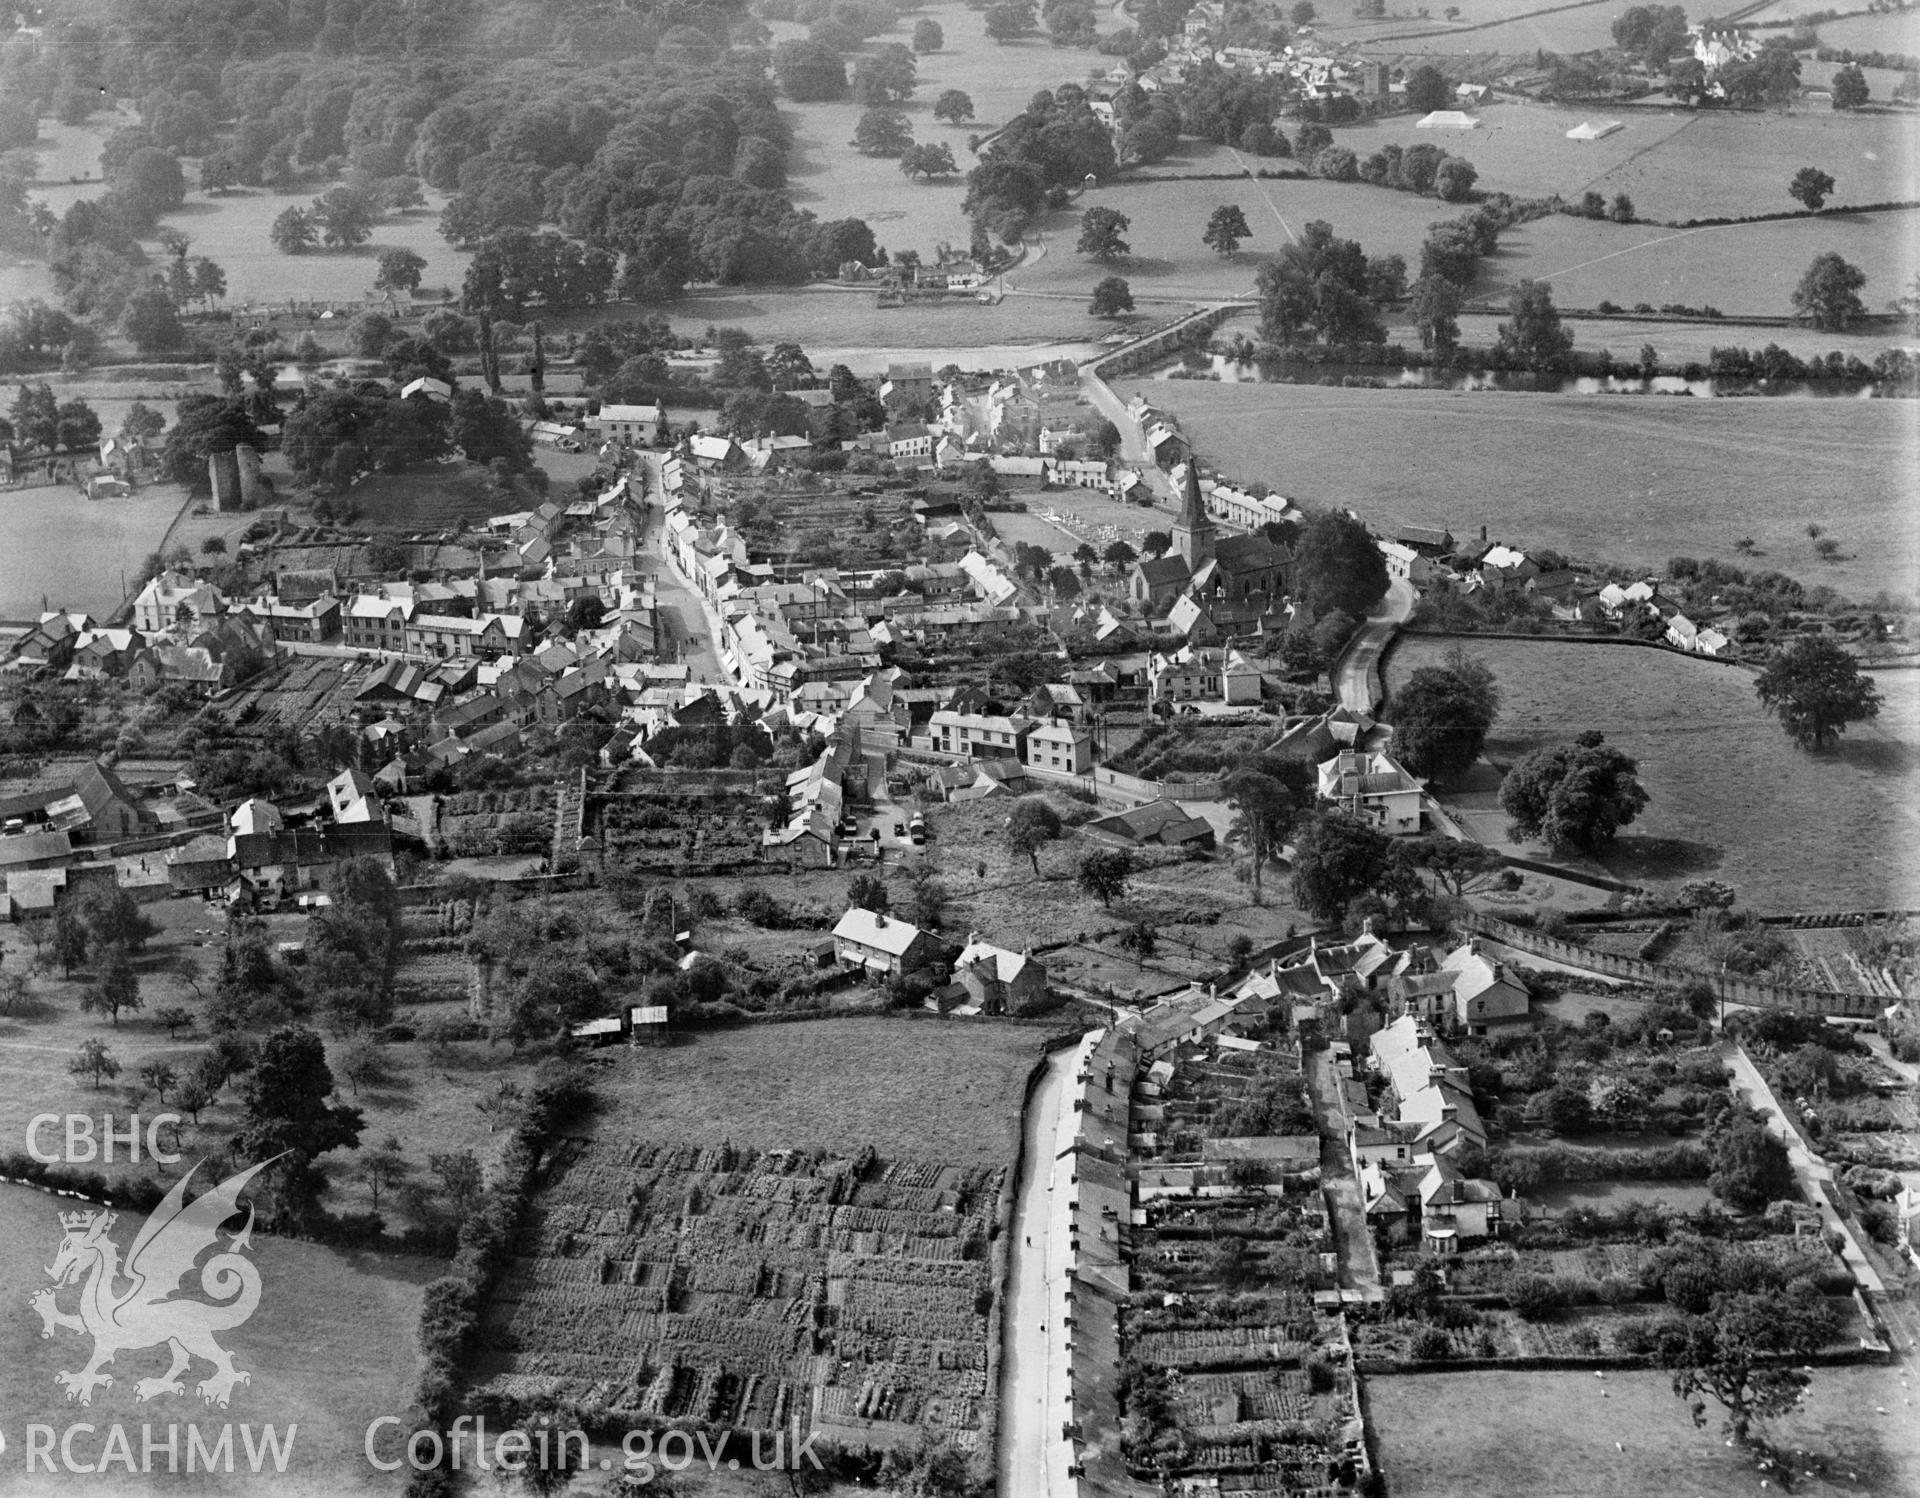 General view of Crickhowell, oblique aerial view. 5?x4? black and white glass plate negative.